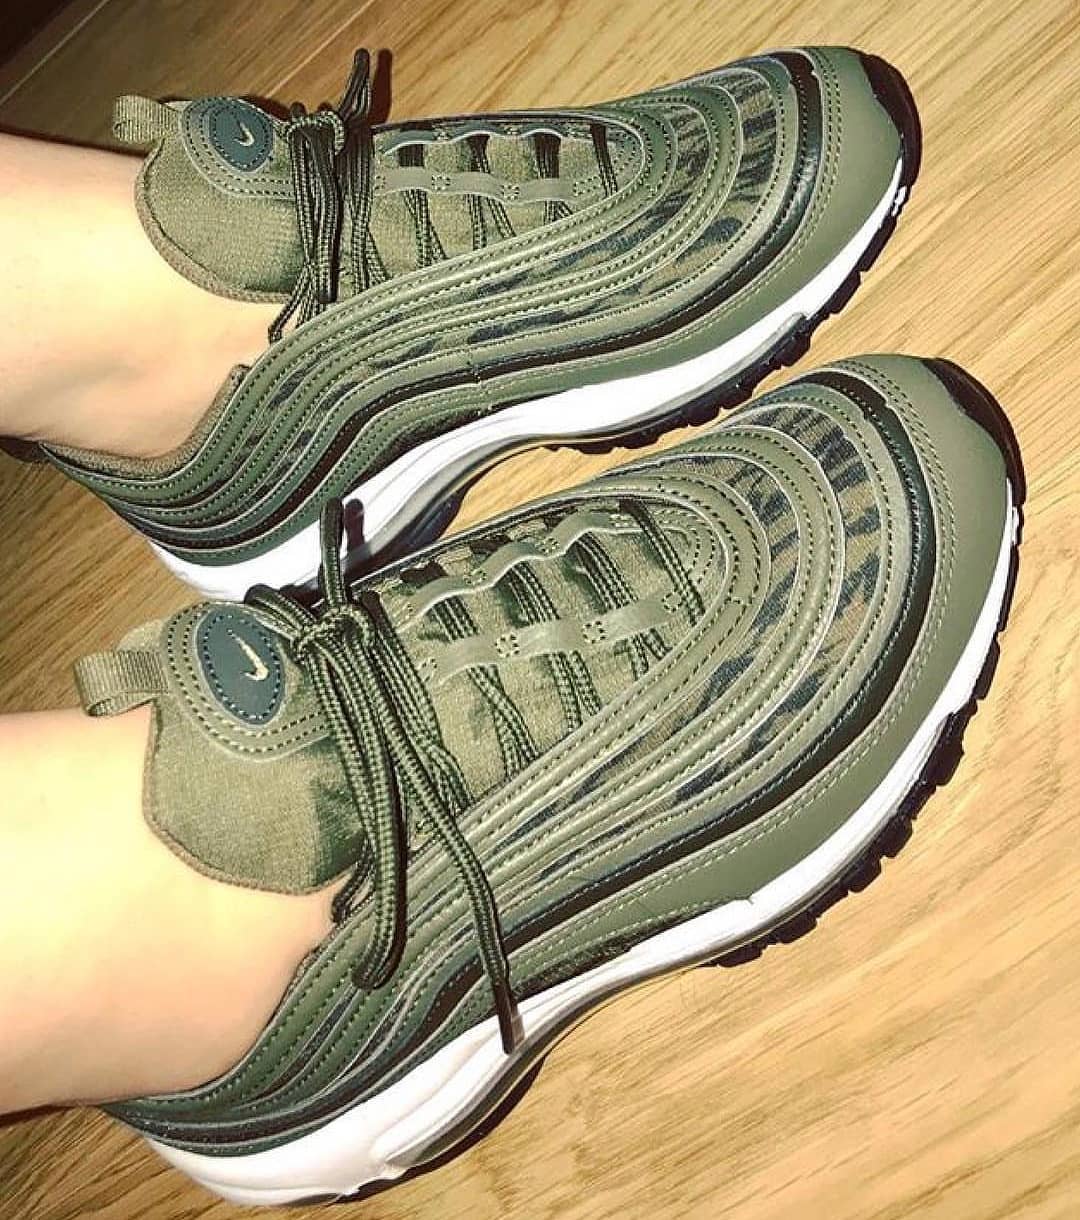 Chaussure Nike Air Max 97 Tiger Camo Vert Olive réfléchissante on feet